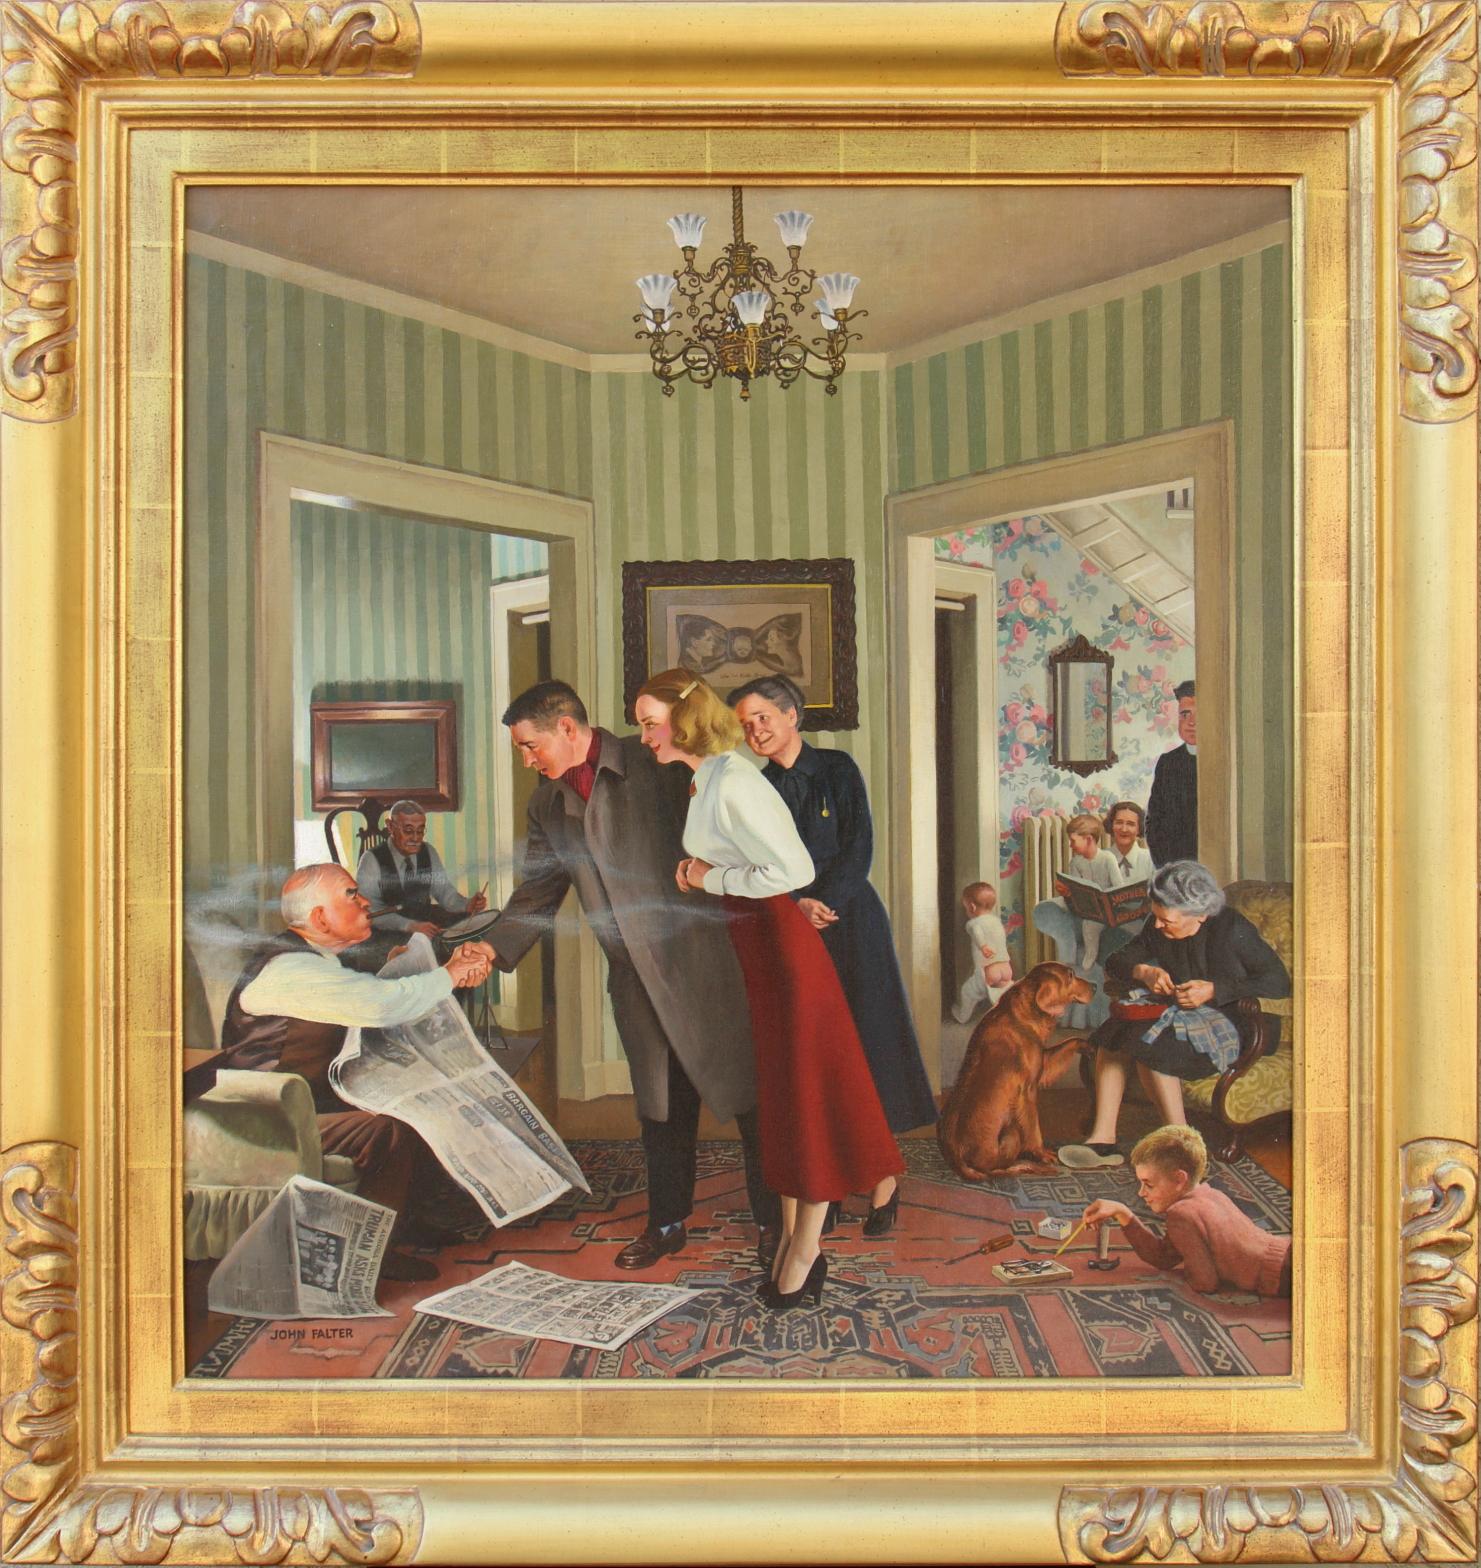 New Boyfriend, Saturday Evening Post Cover - Painting by John Philip Falter